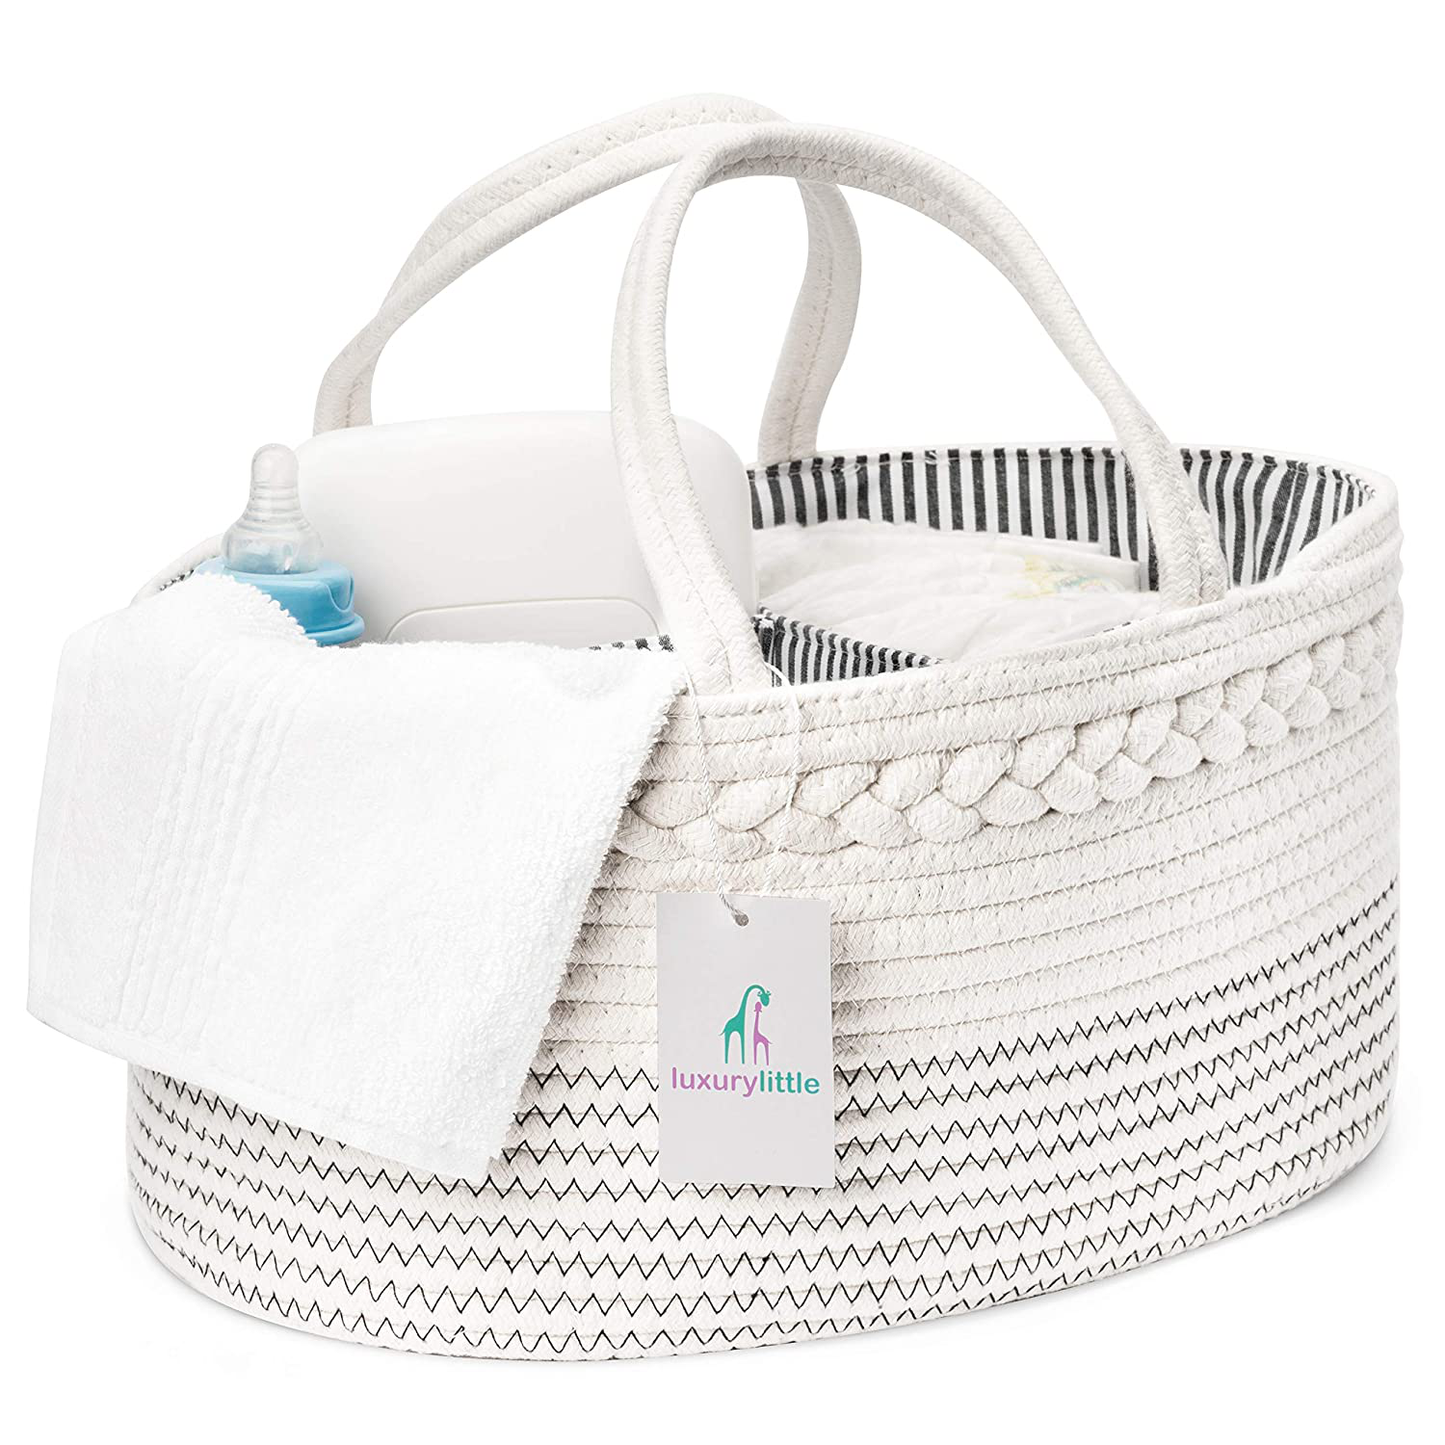 Luxury Little Baby Diaper Caddy Organizer - Rope Nursery Storage Bin for Boys and Girls - Large Tote Bag & Car Organizer with Removable Inserts - Baby Shower Gift Basket - Newborn Registry Must Haves